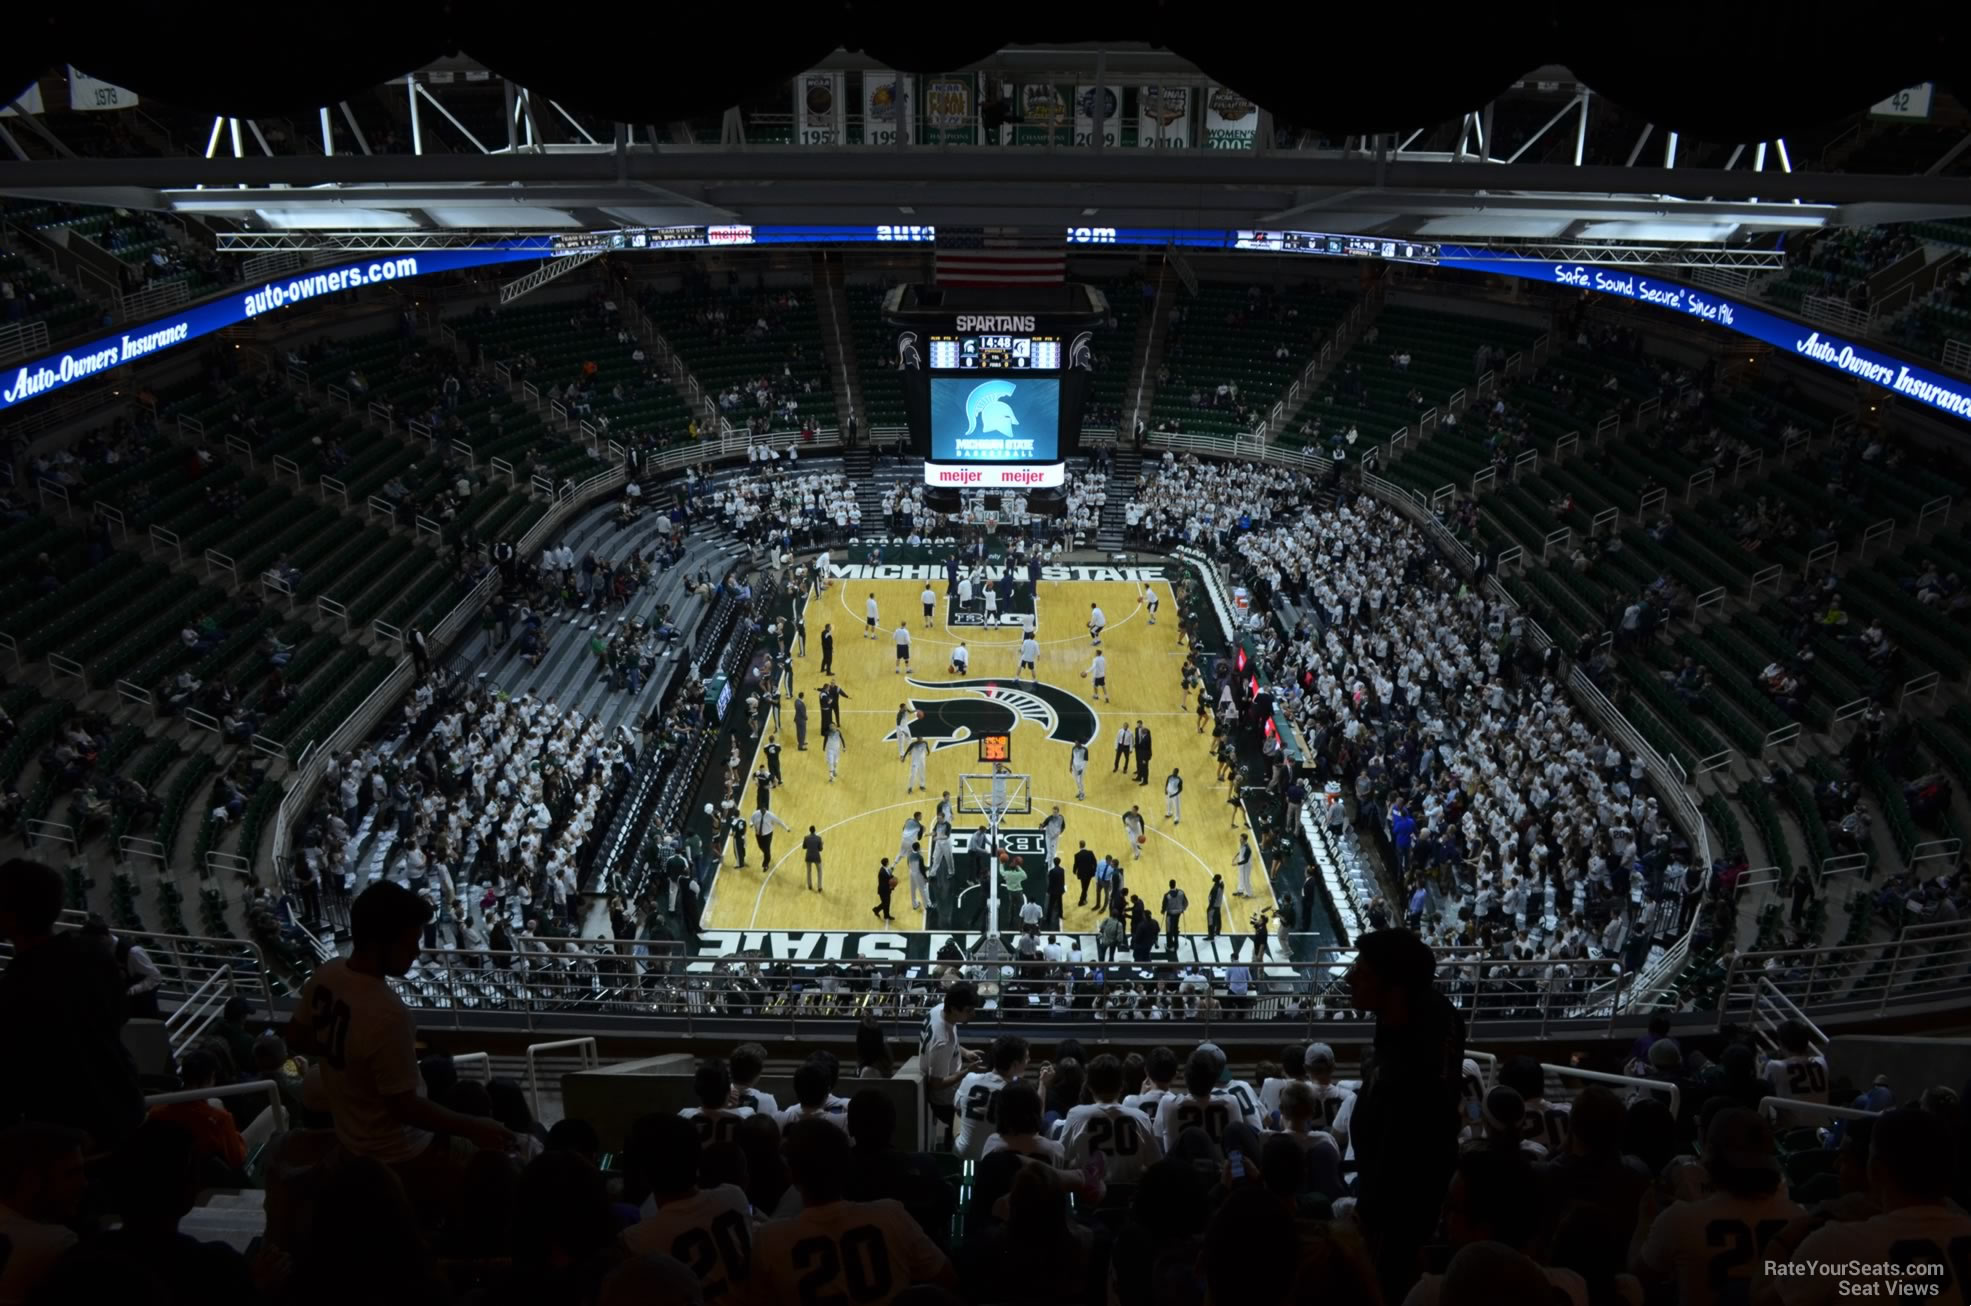 section 218, row 15 seat view  - breslin center